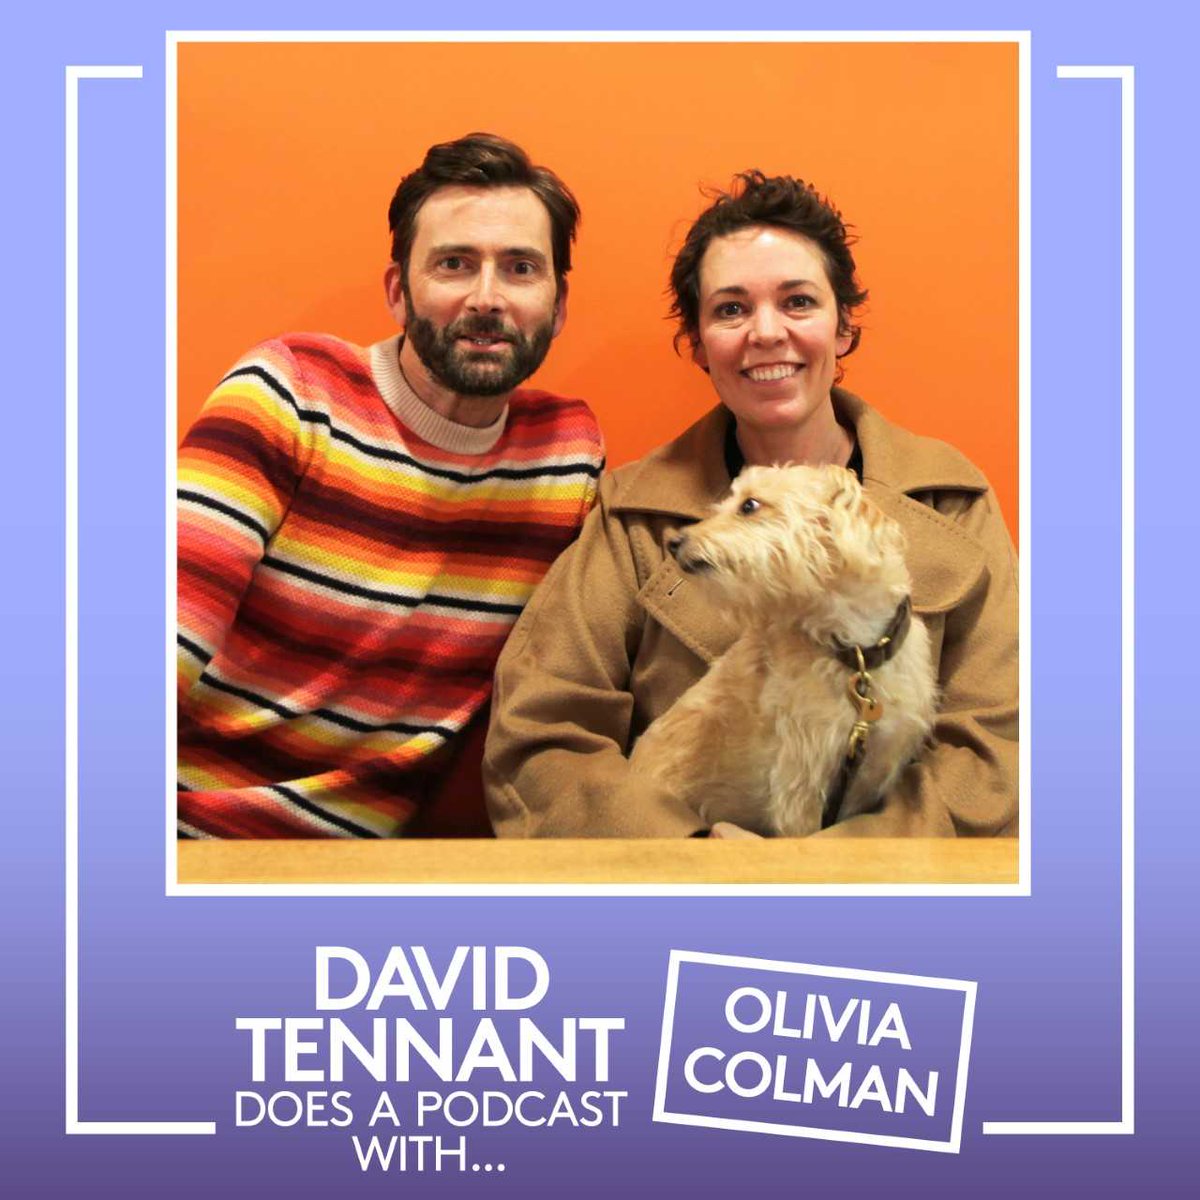 David Tennant Does A Podcast With... Olivia Colman